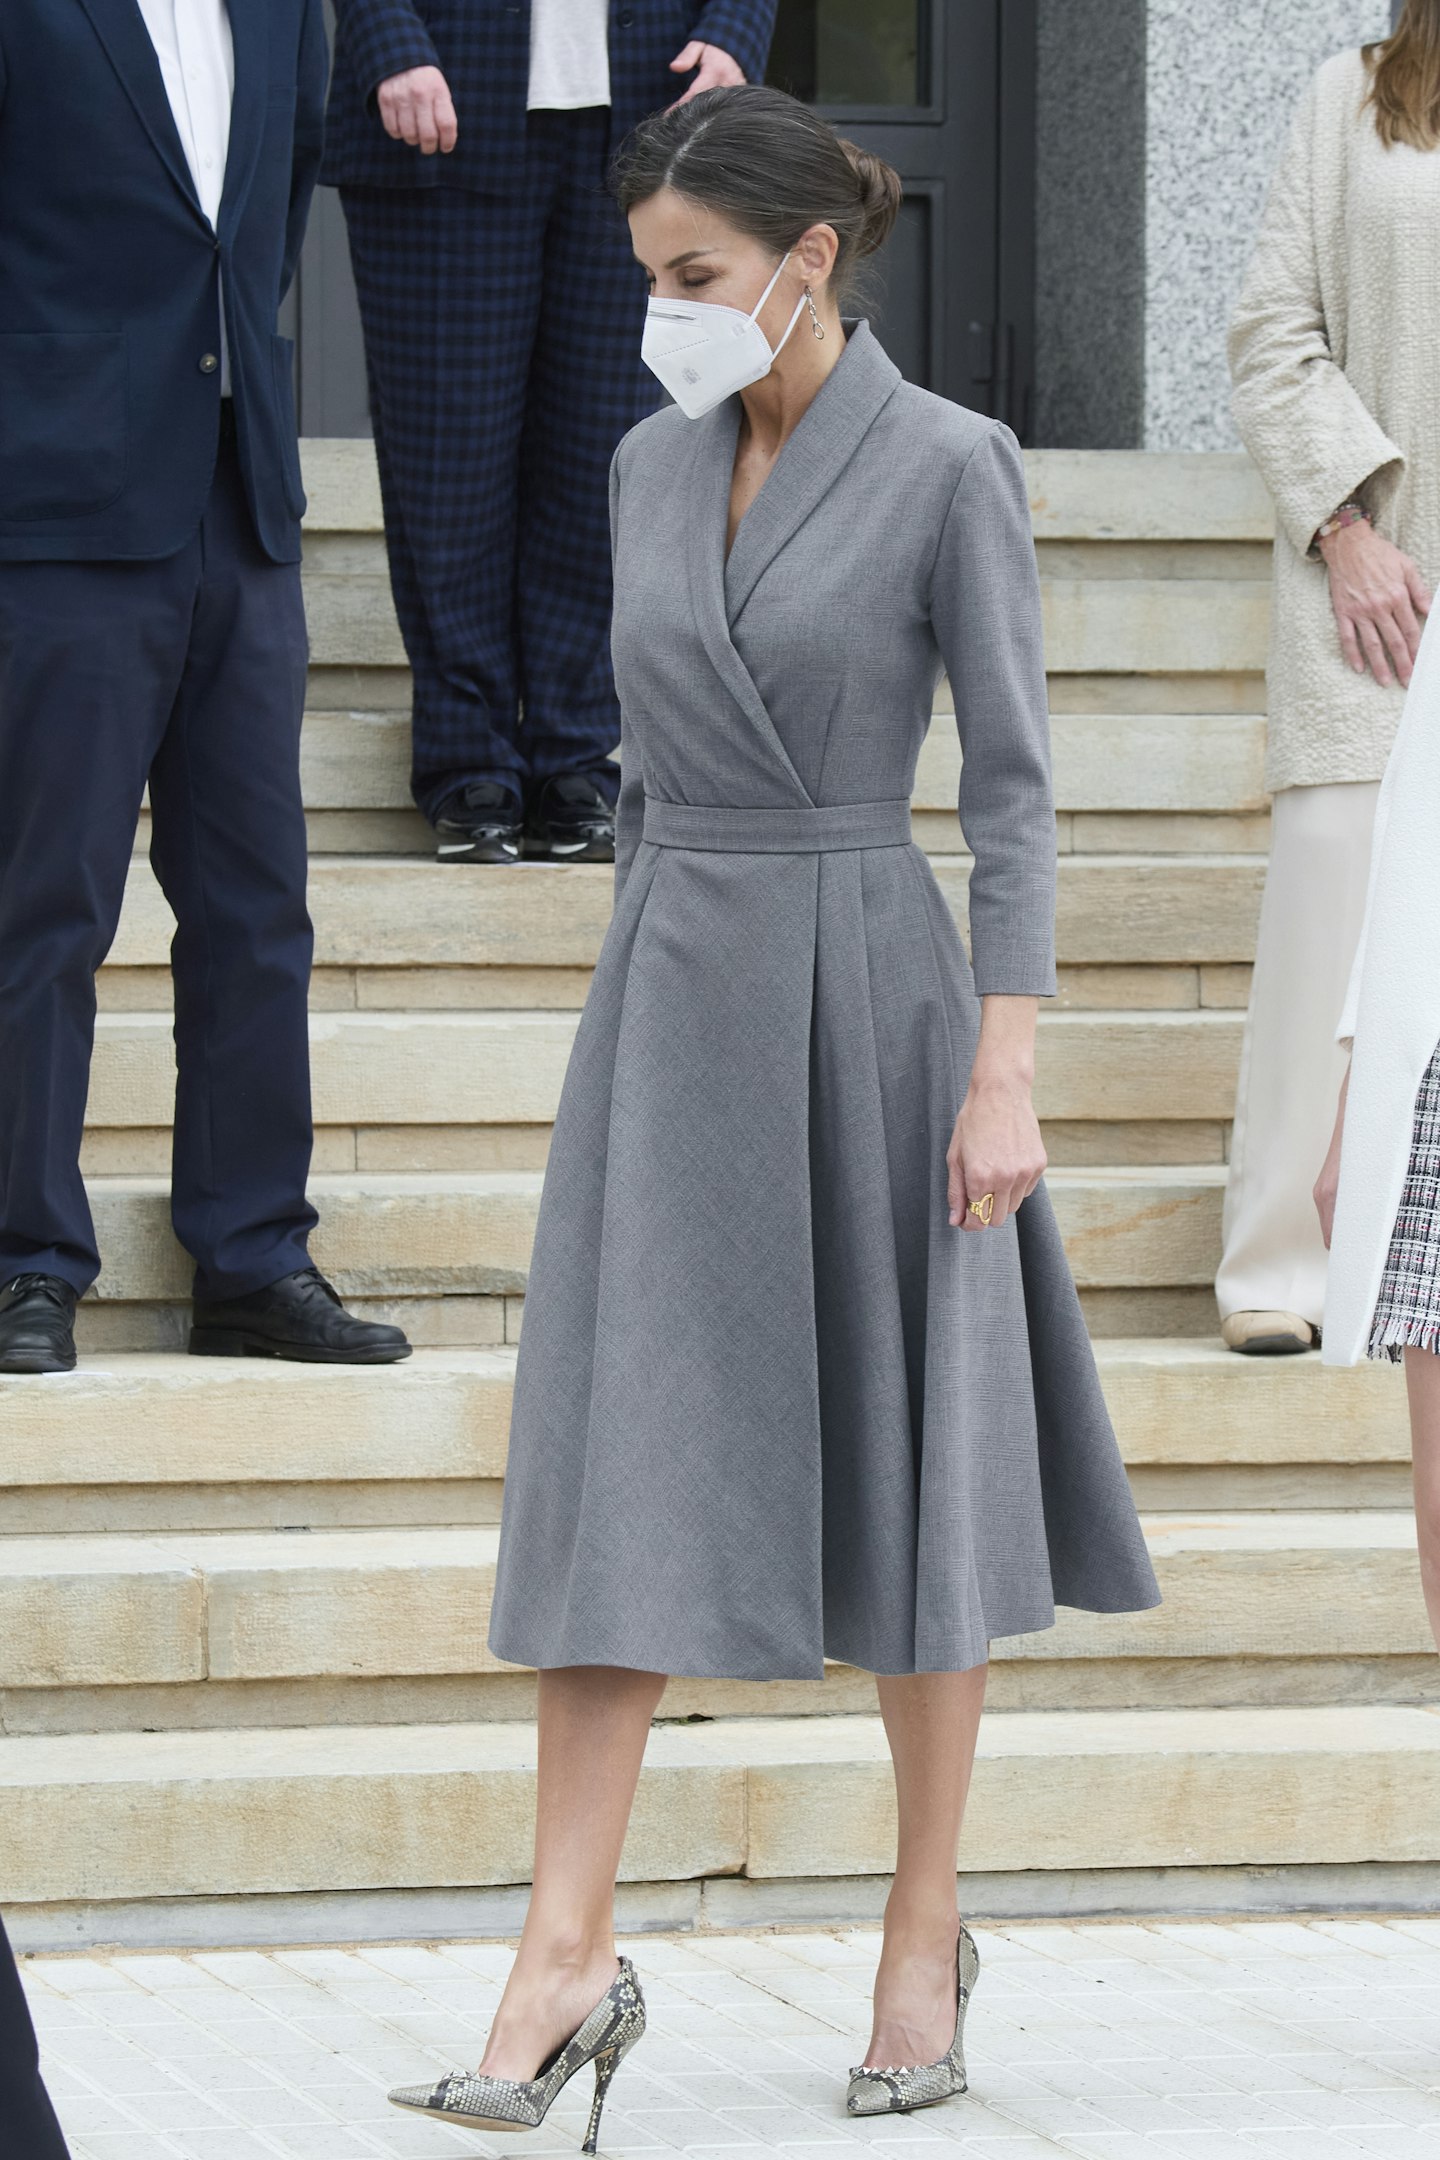 Queen Letizia wearing a grey wrap dress and snake-print heels from Magrit